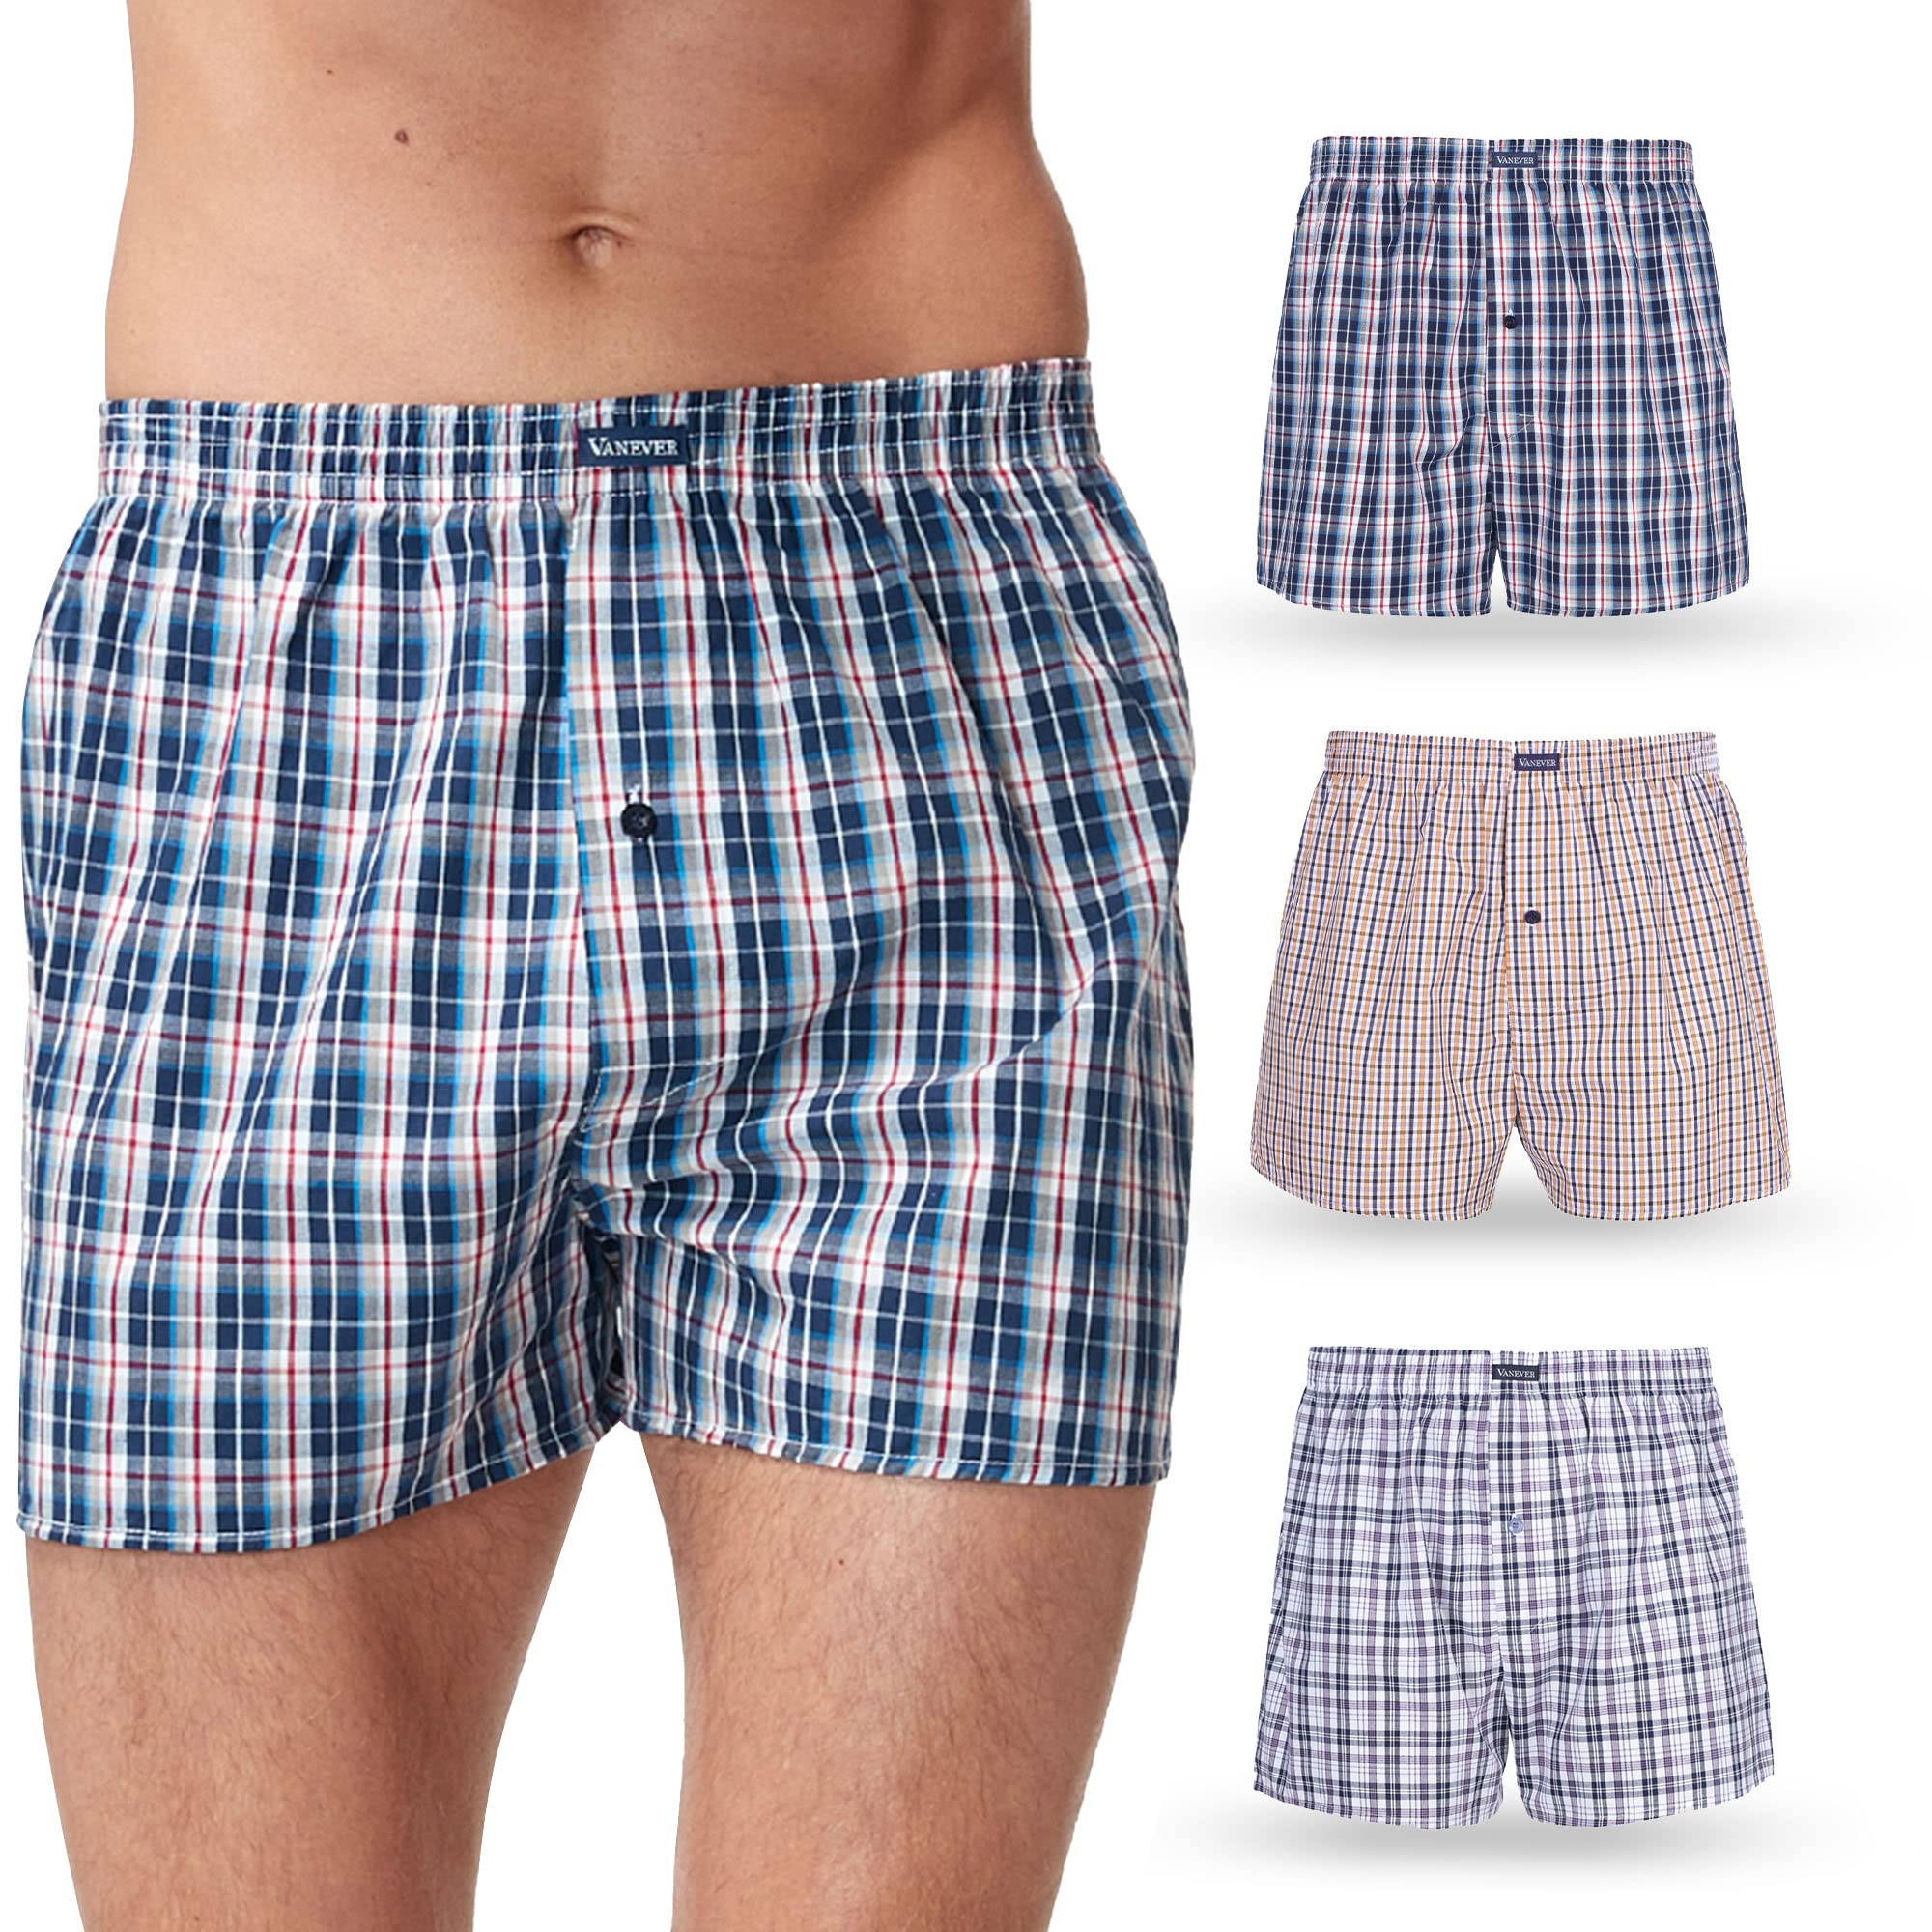 Men’s boxer shorts – How to Differentiate Materials插图4